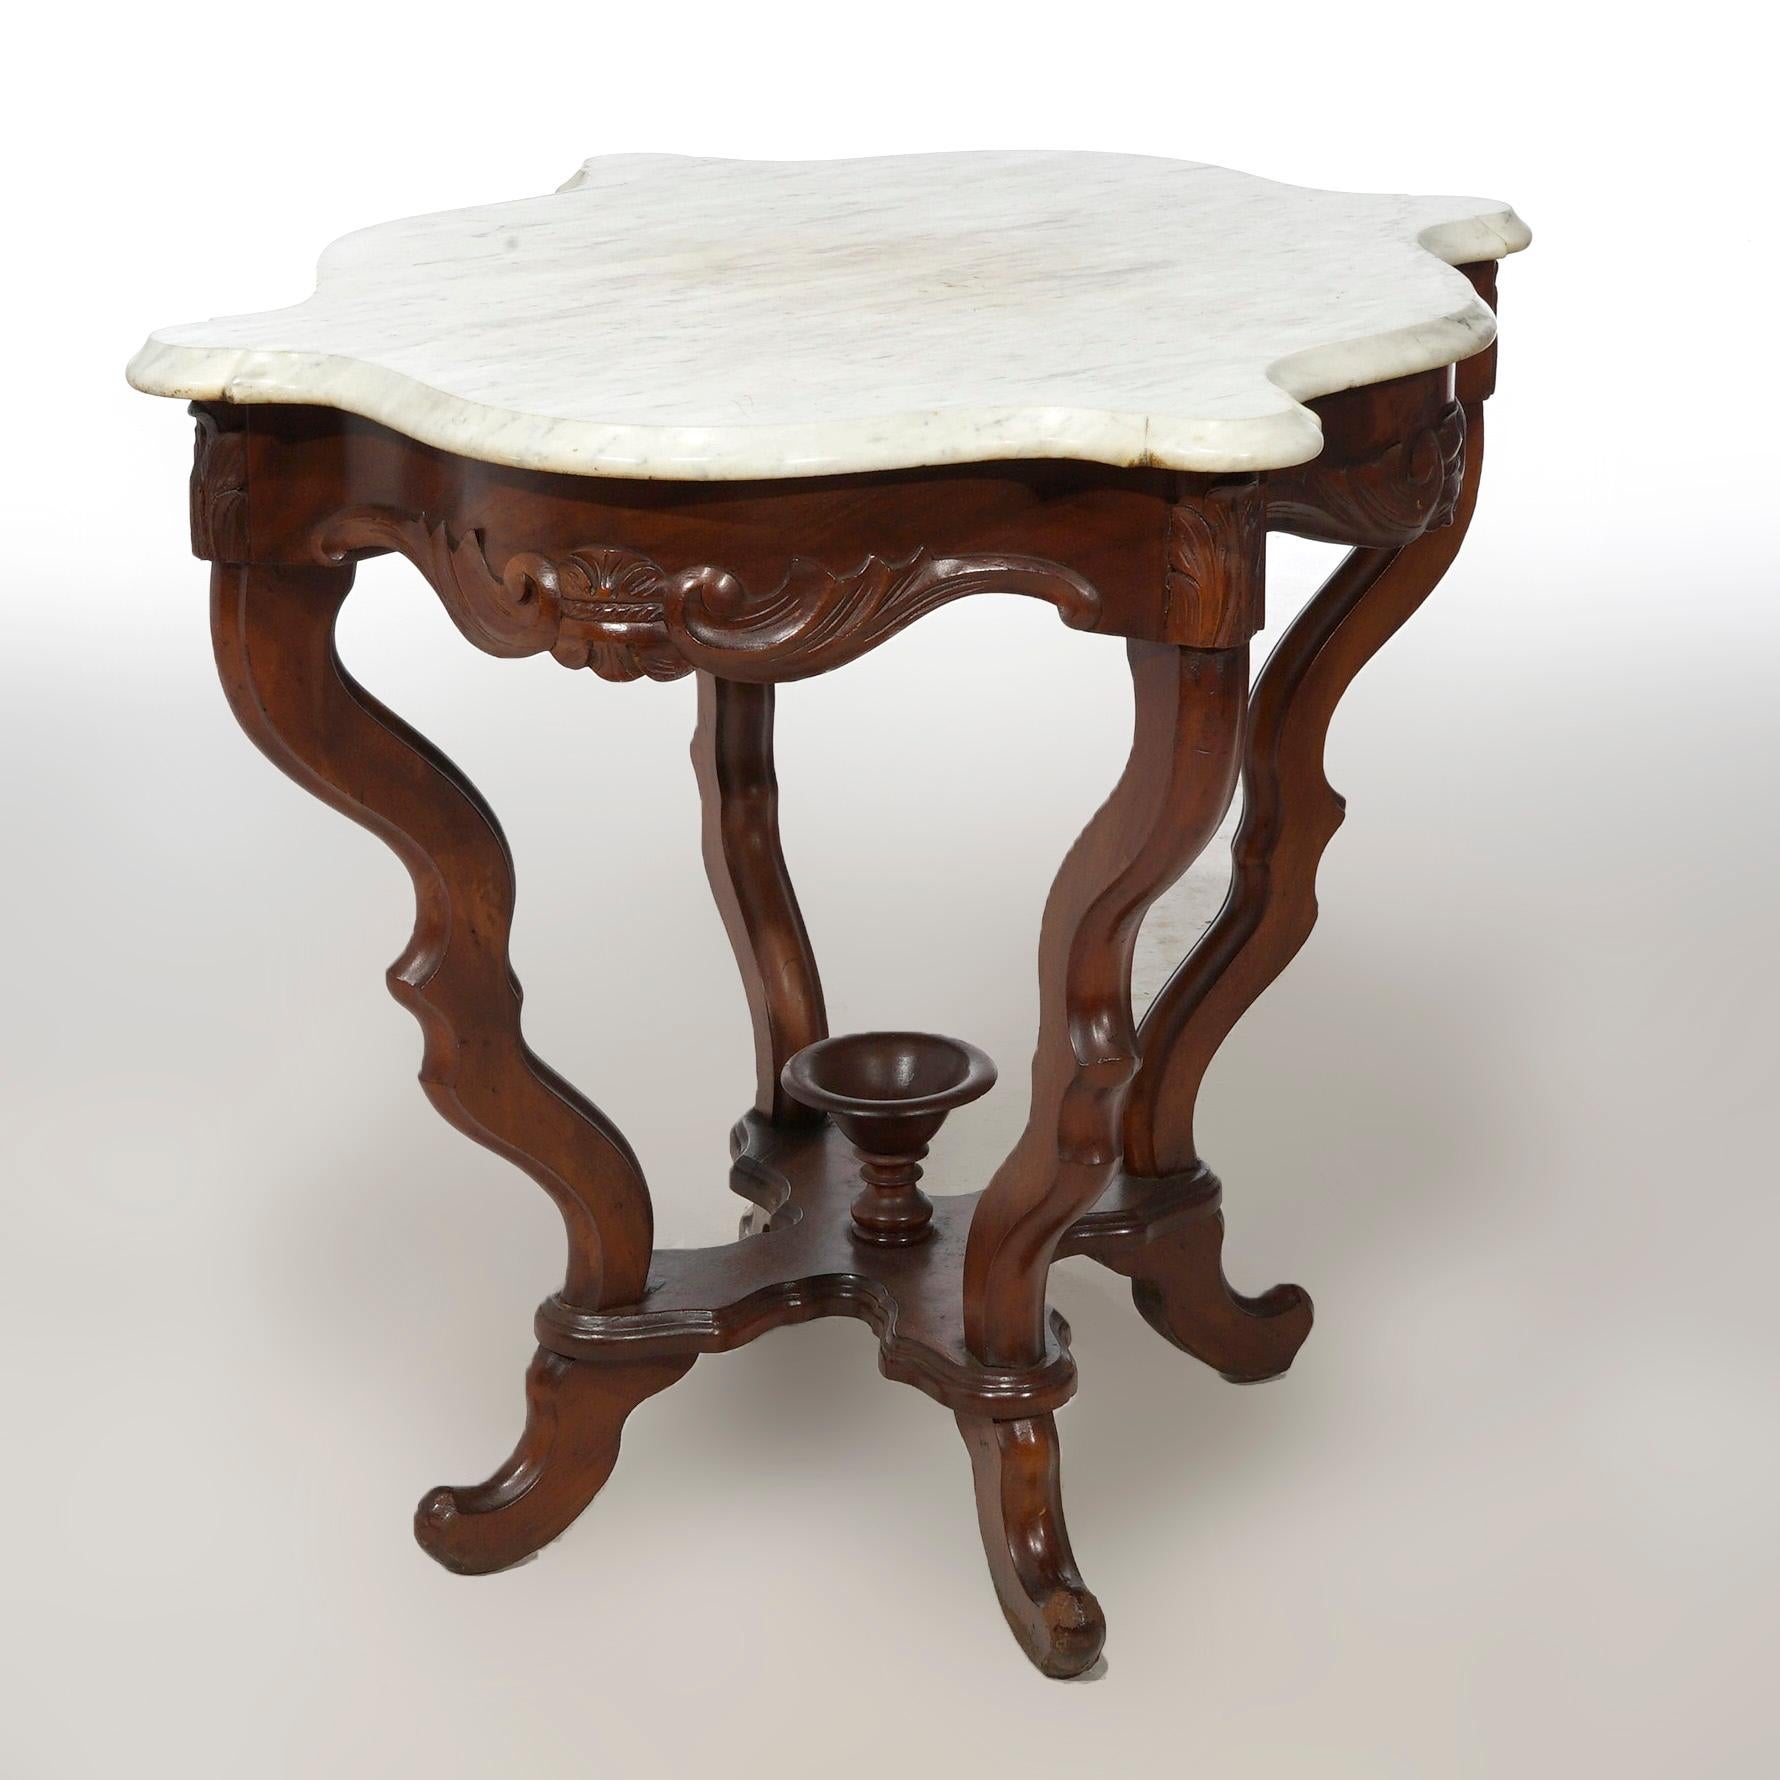 American Antique Victorian Walnut & Marble Turtle Top Parlor Table Circa 1890 For Sale